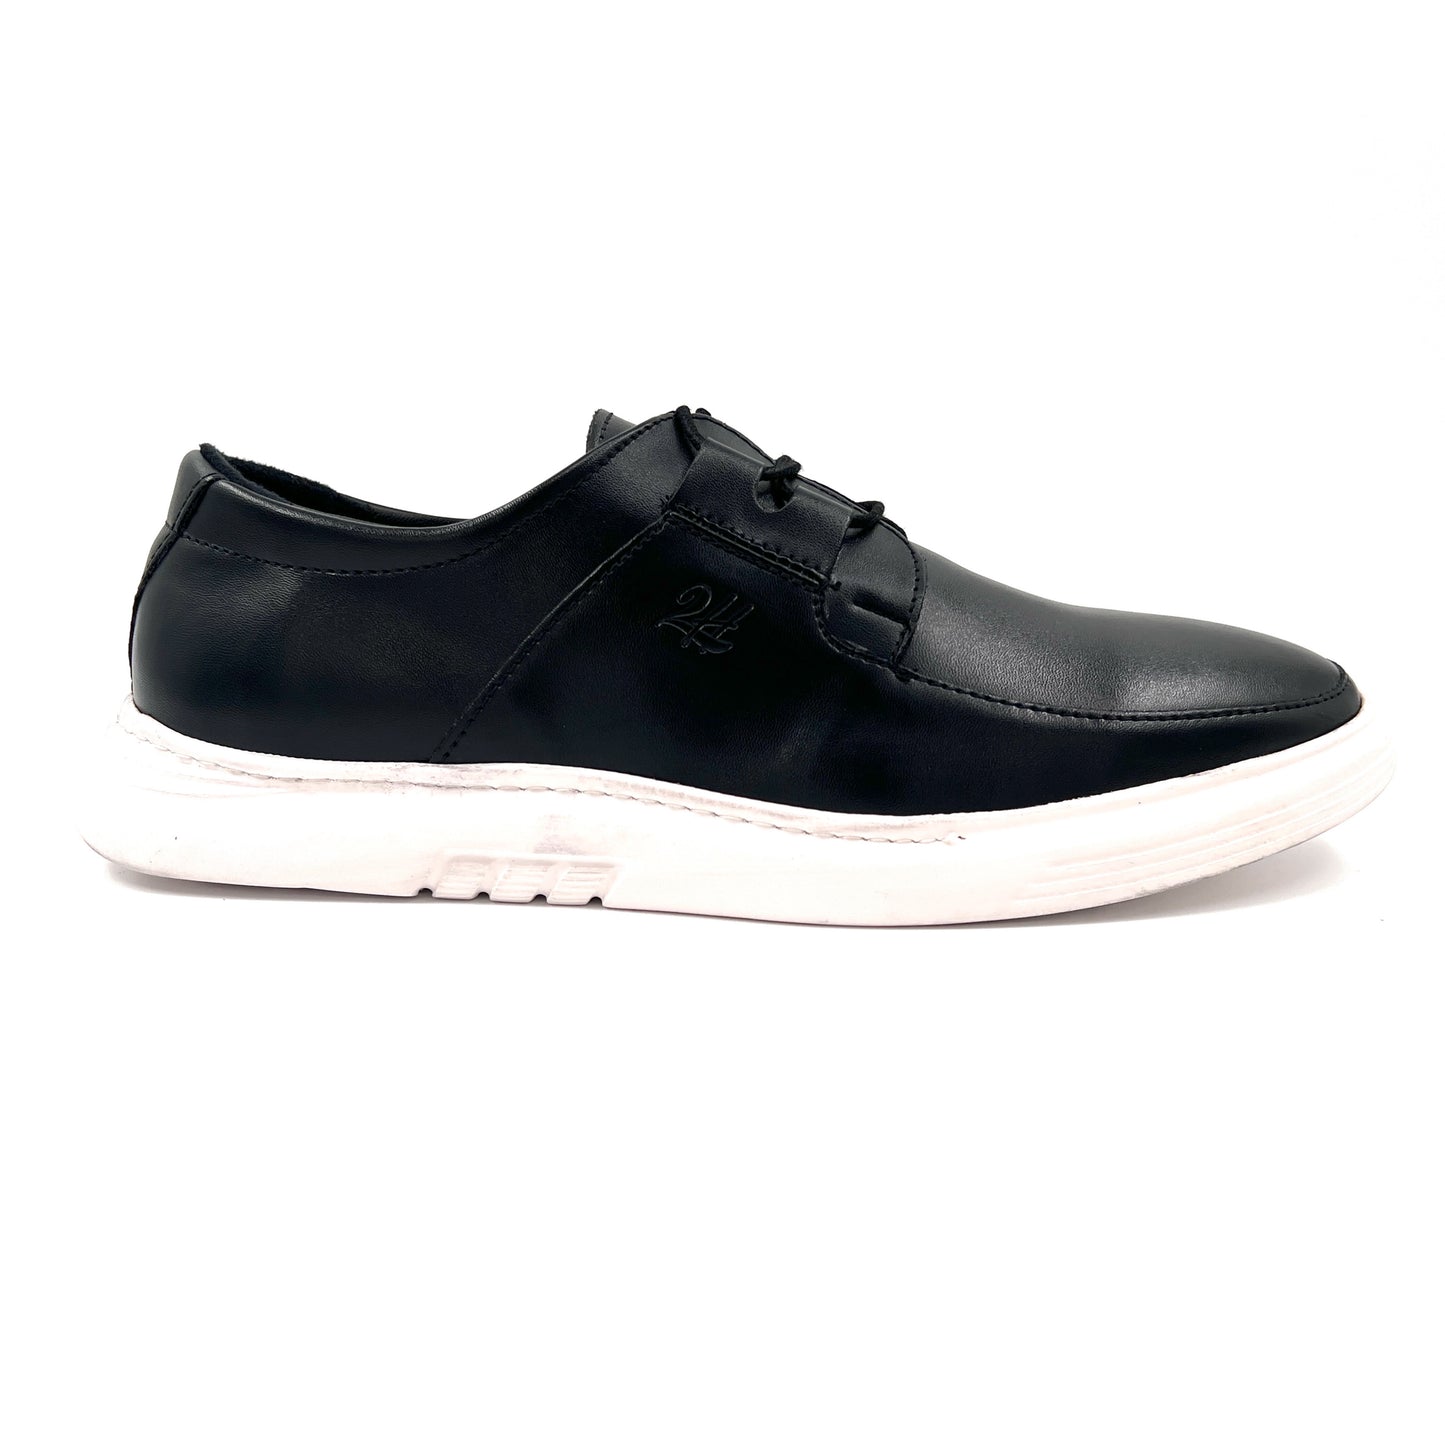 2H 3104 Black/White Sole Casual Shoes